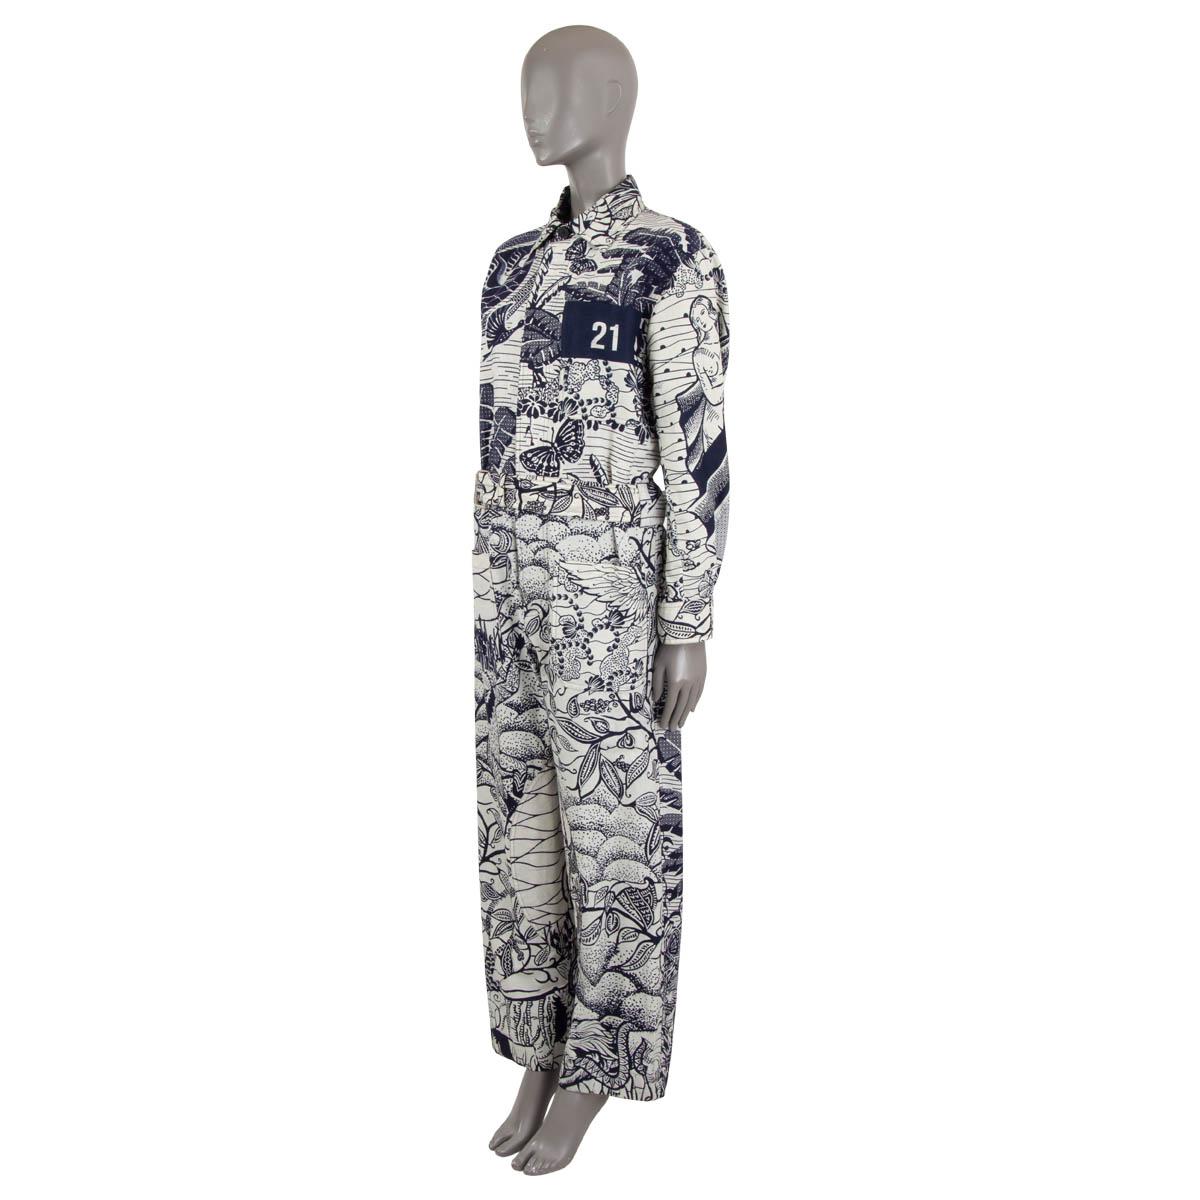 100% authentic Christian Dior belted jumpsuit in navy blue and off-white cotton (100%) with Toile de Jouy Tropicalia print. Features a chest pocket, two patch pockets and a relaxed fit. Closes with buttons on the front and is unlined. Has been worn